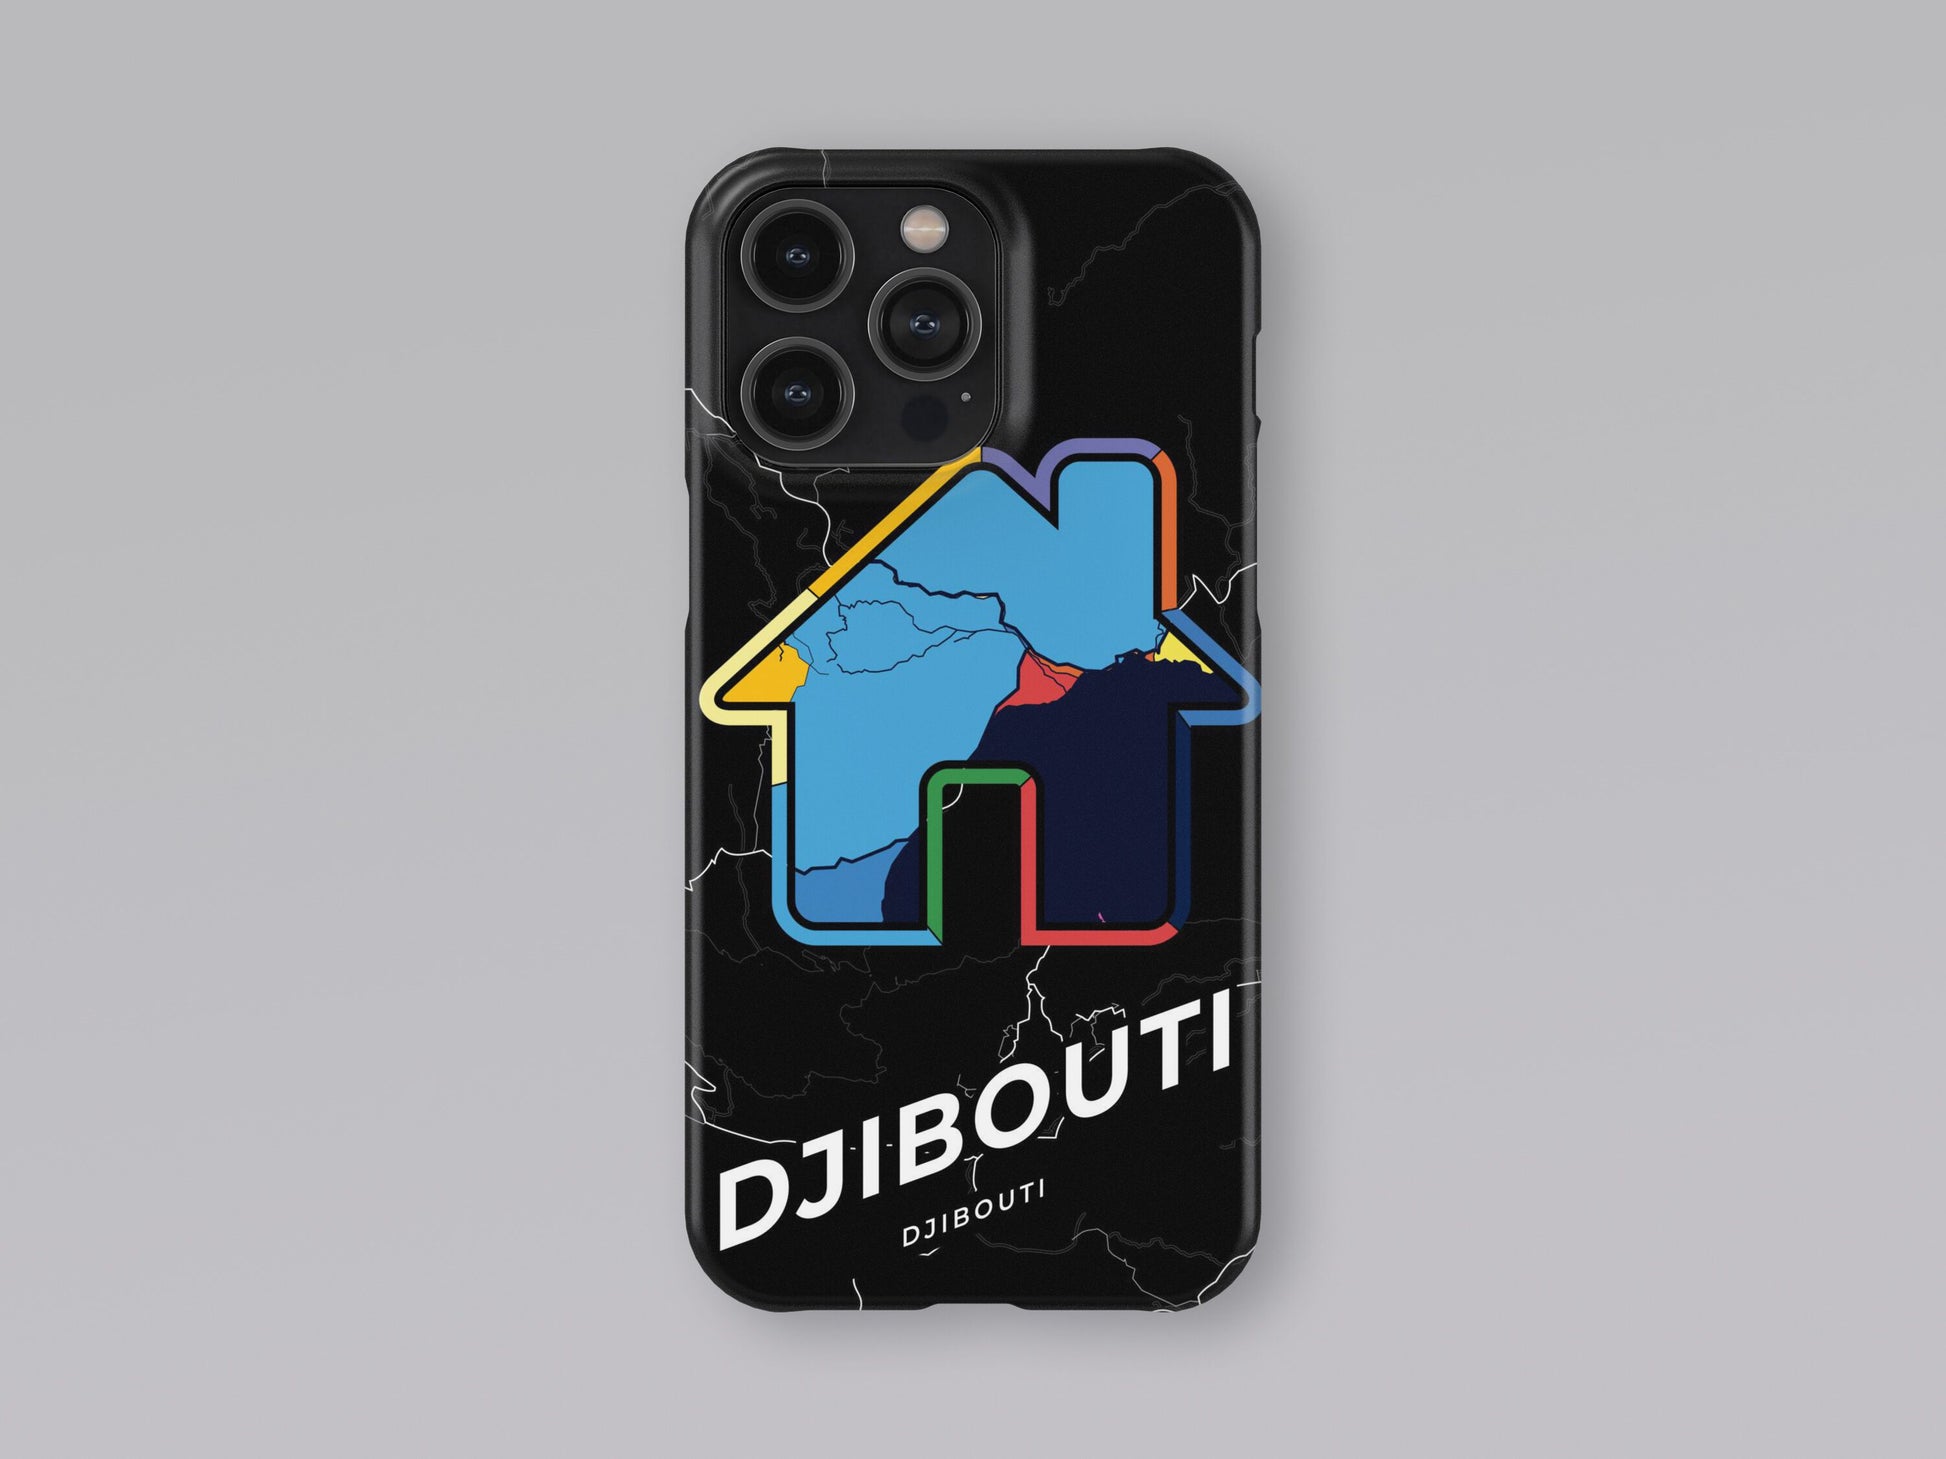 Djibouti Djibouti slim phone case with colorful icon. Birthday, wedding or housewarming gift. Couple match cases. 3